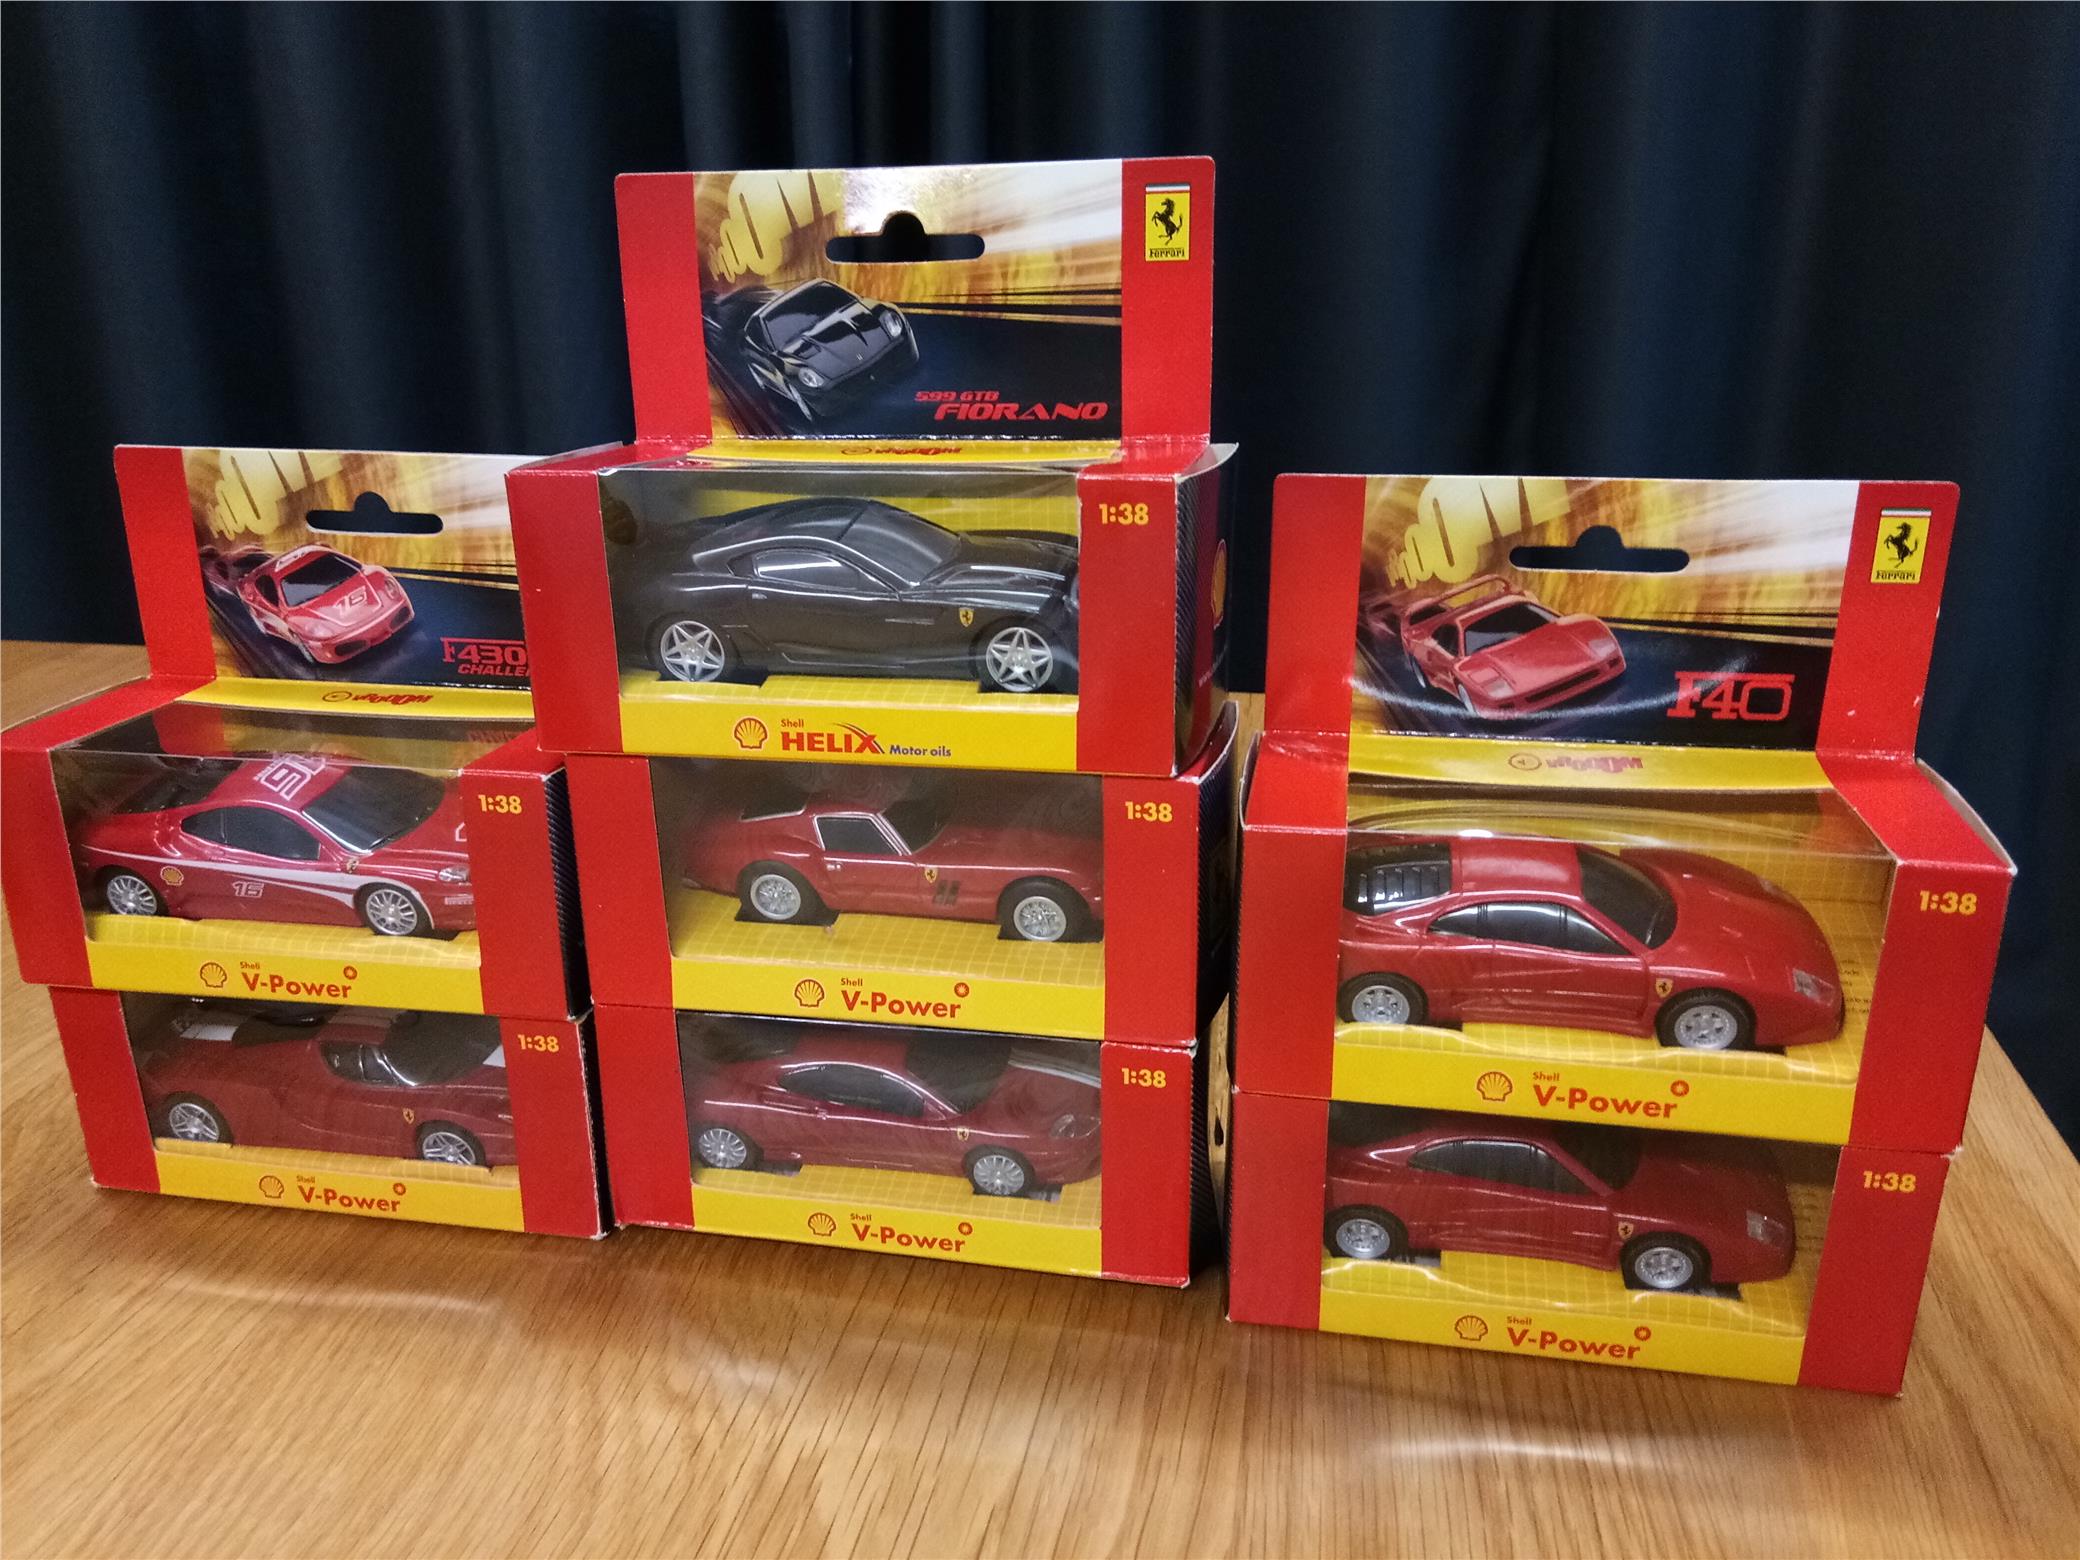 shell toy car collection 2019